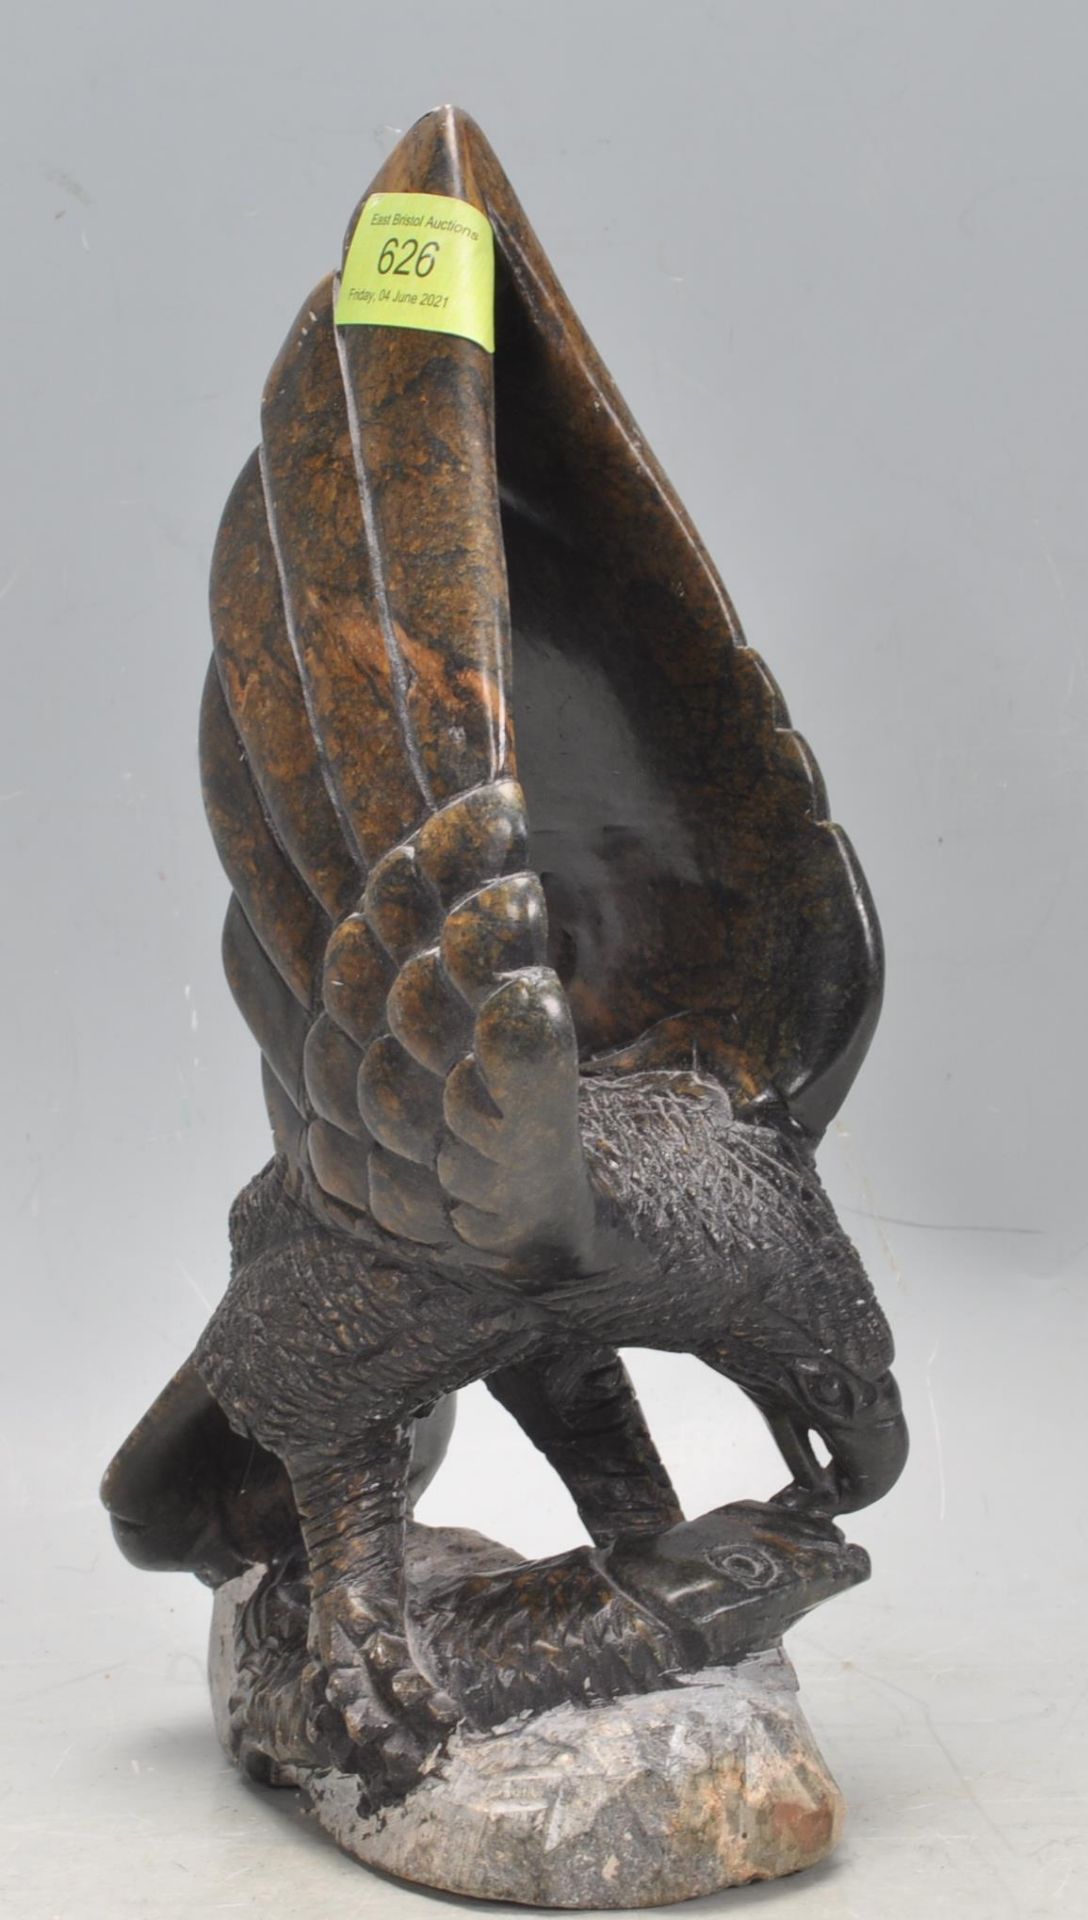 20TH CENTURY CARVED HARDSTONE FIGURE OF A BIRD OF PREY.